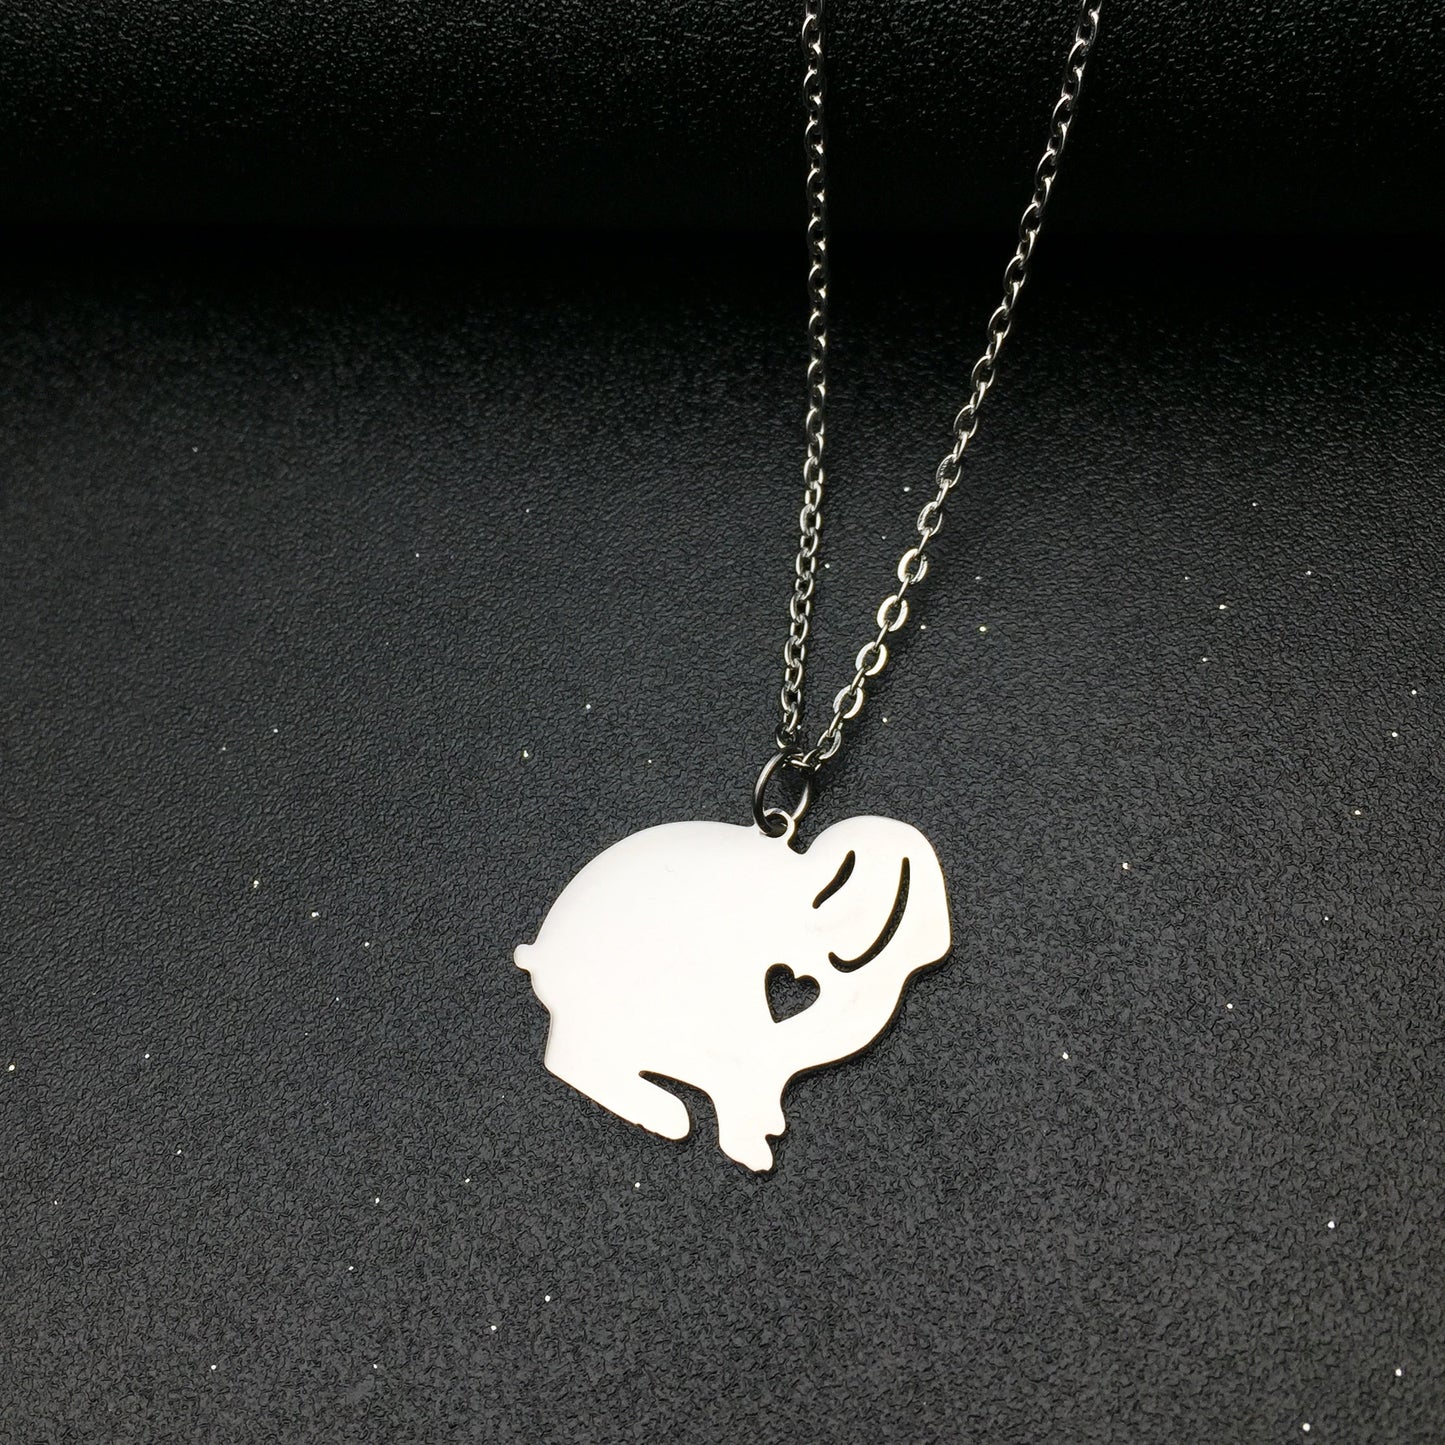 Personalised Rabbit Necklaces by SB